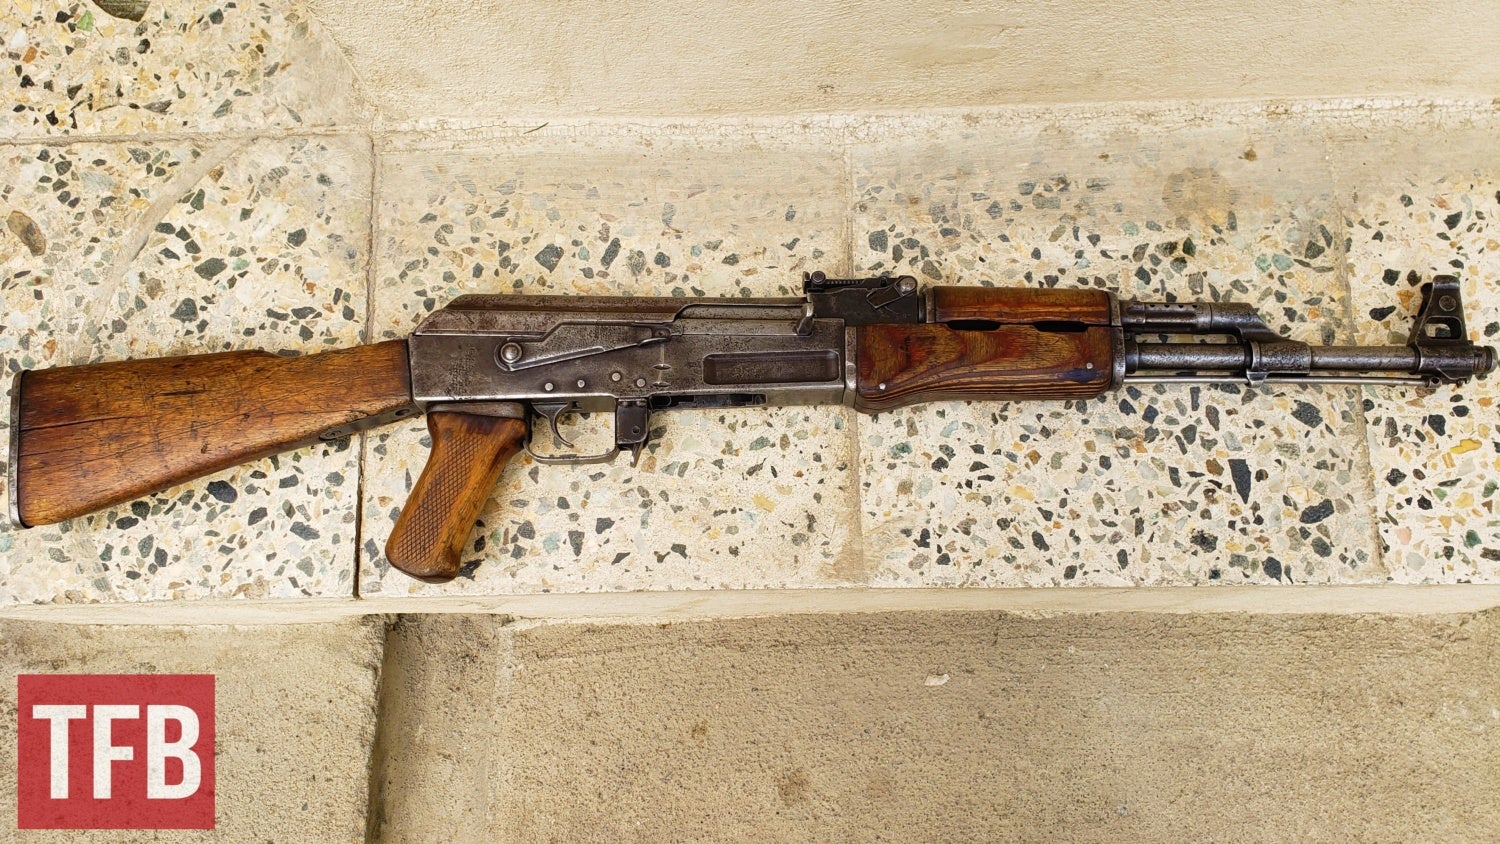 Type 3 AK - the first Kalashnikov that was produced outside of the Soviet Union